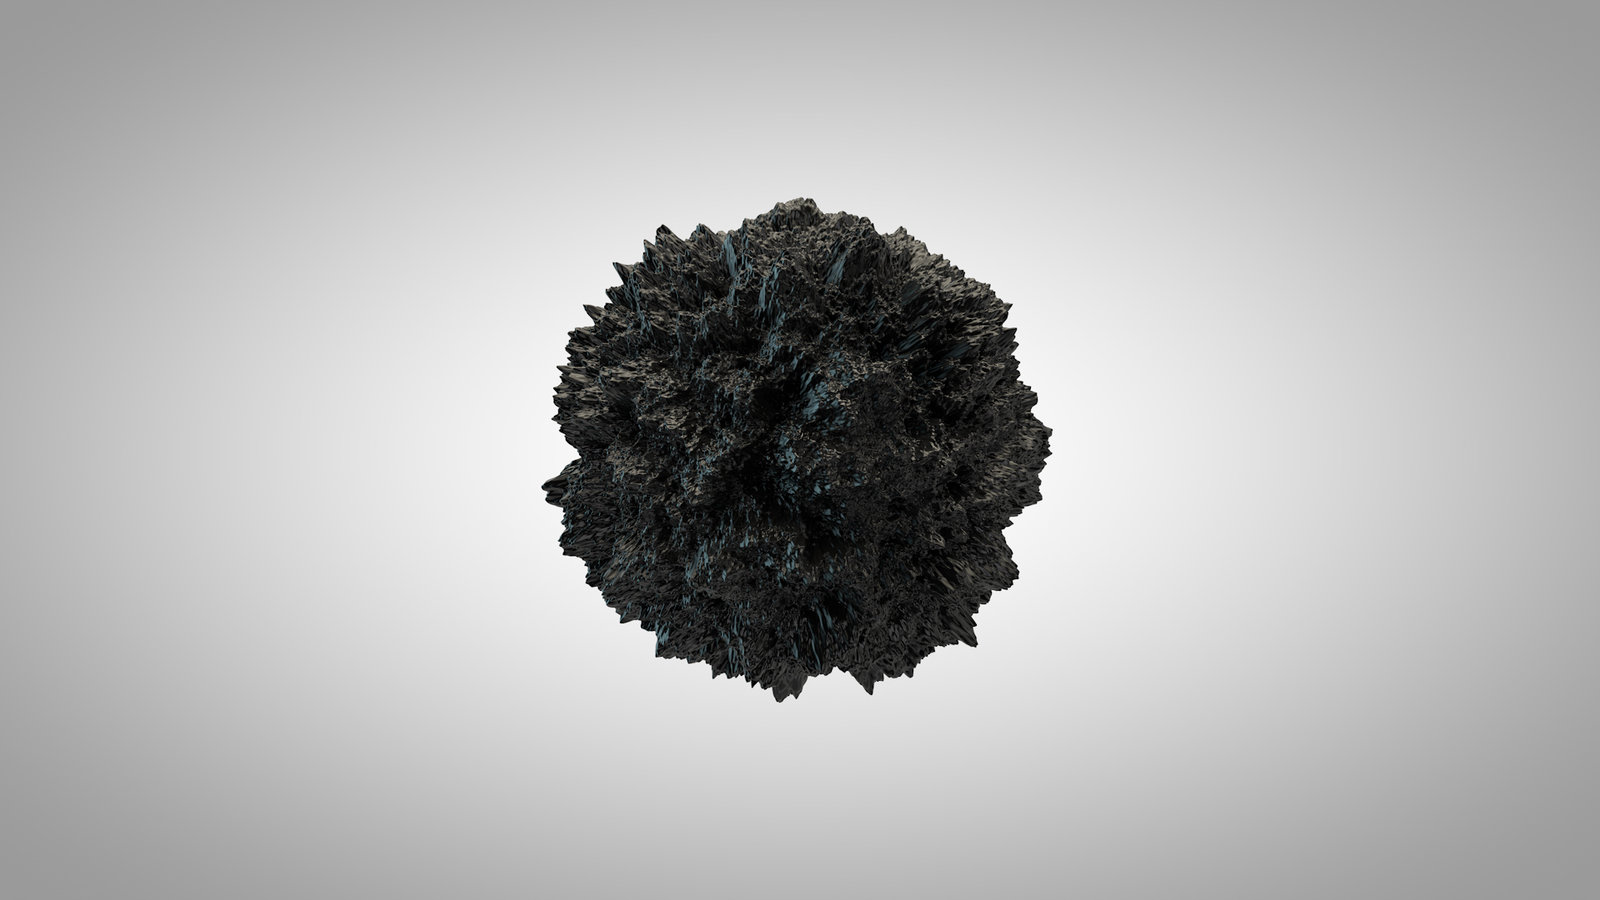 Cinema 4D Mineral by Necrobyte1 on